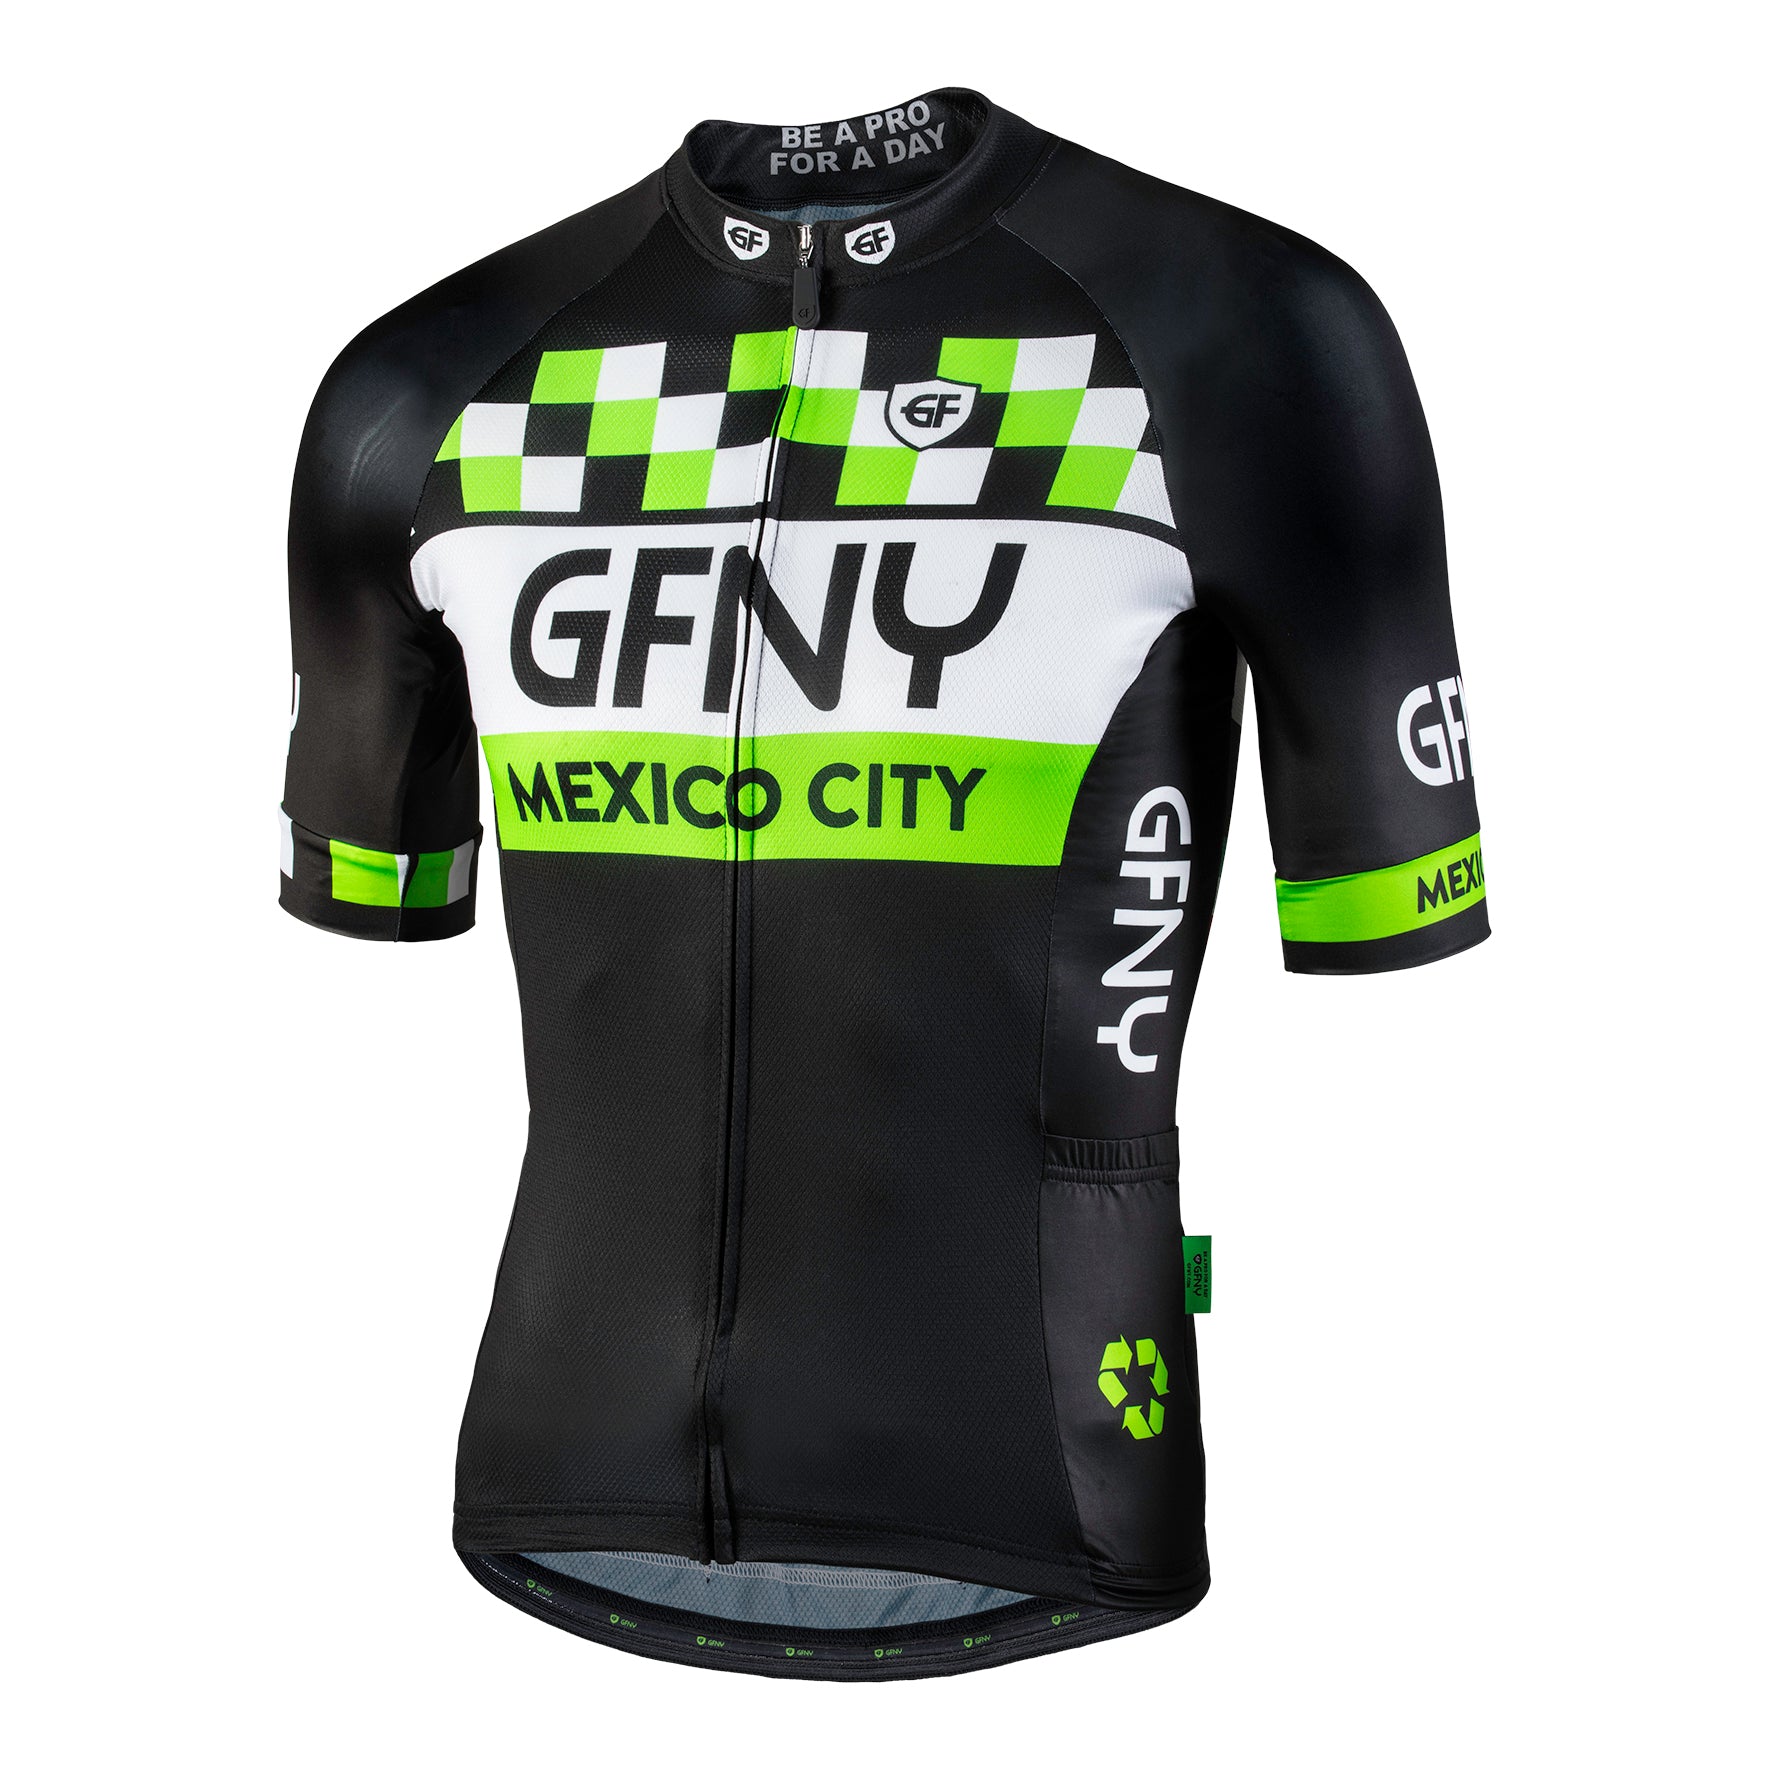 Mexico City Limited Edition Jersey